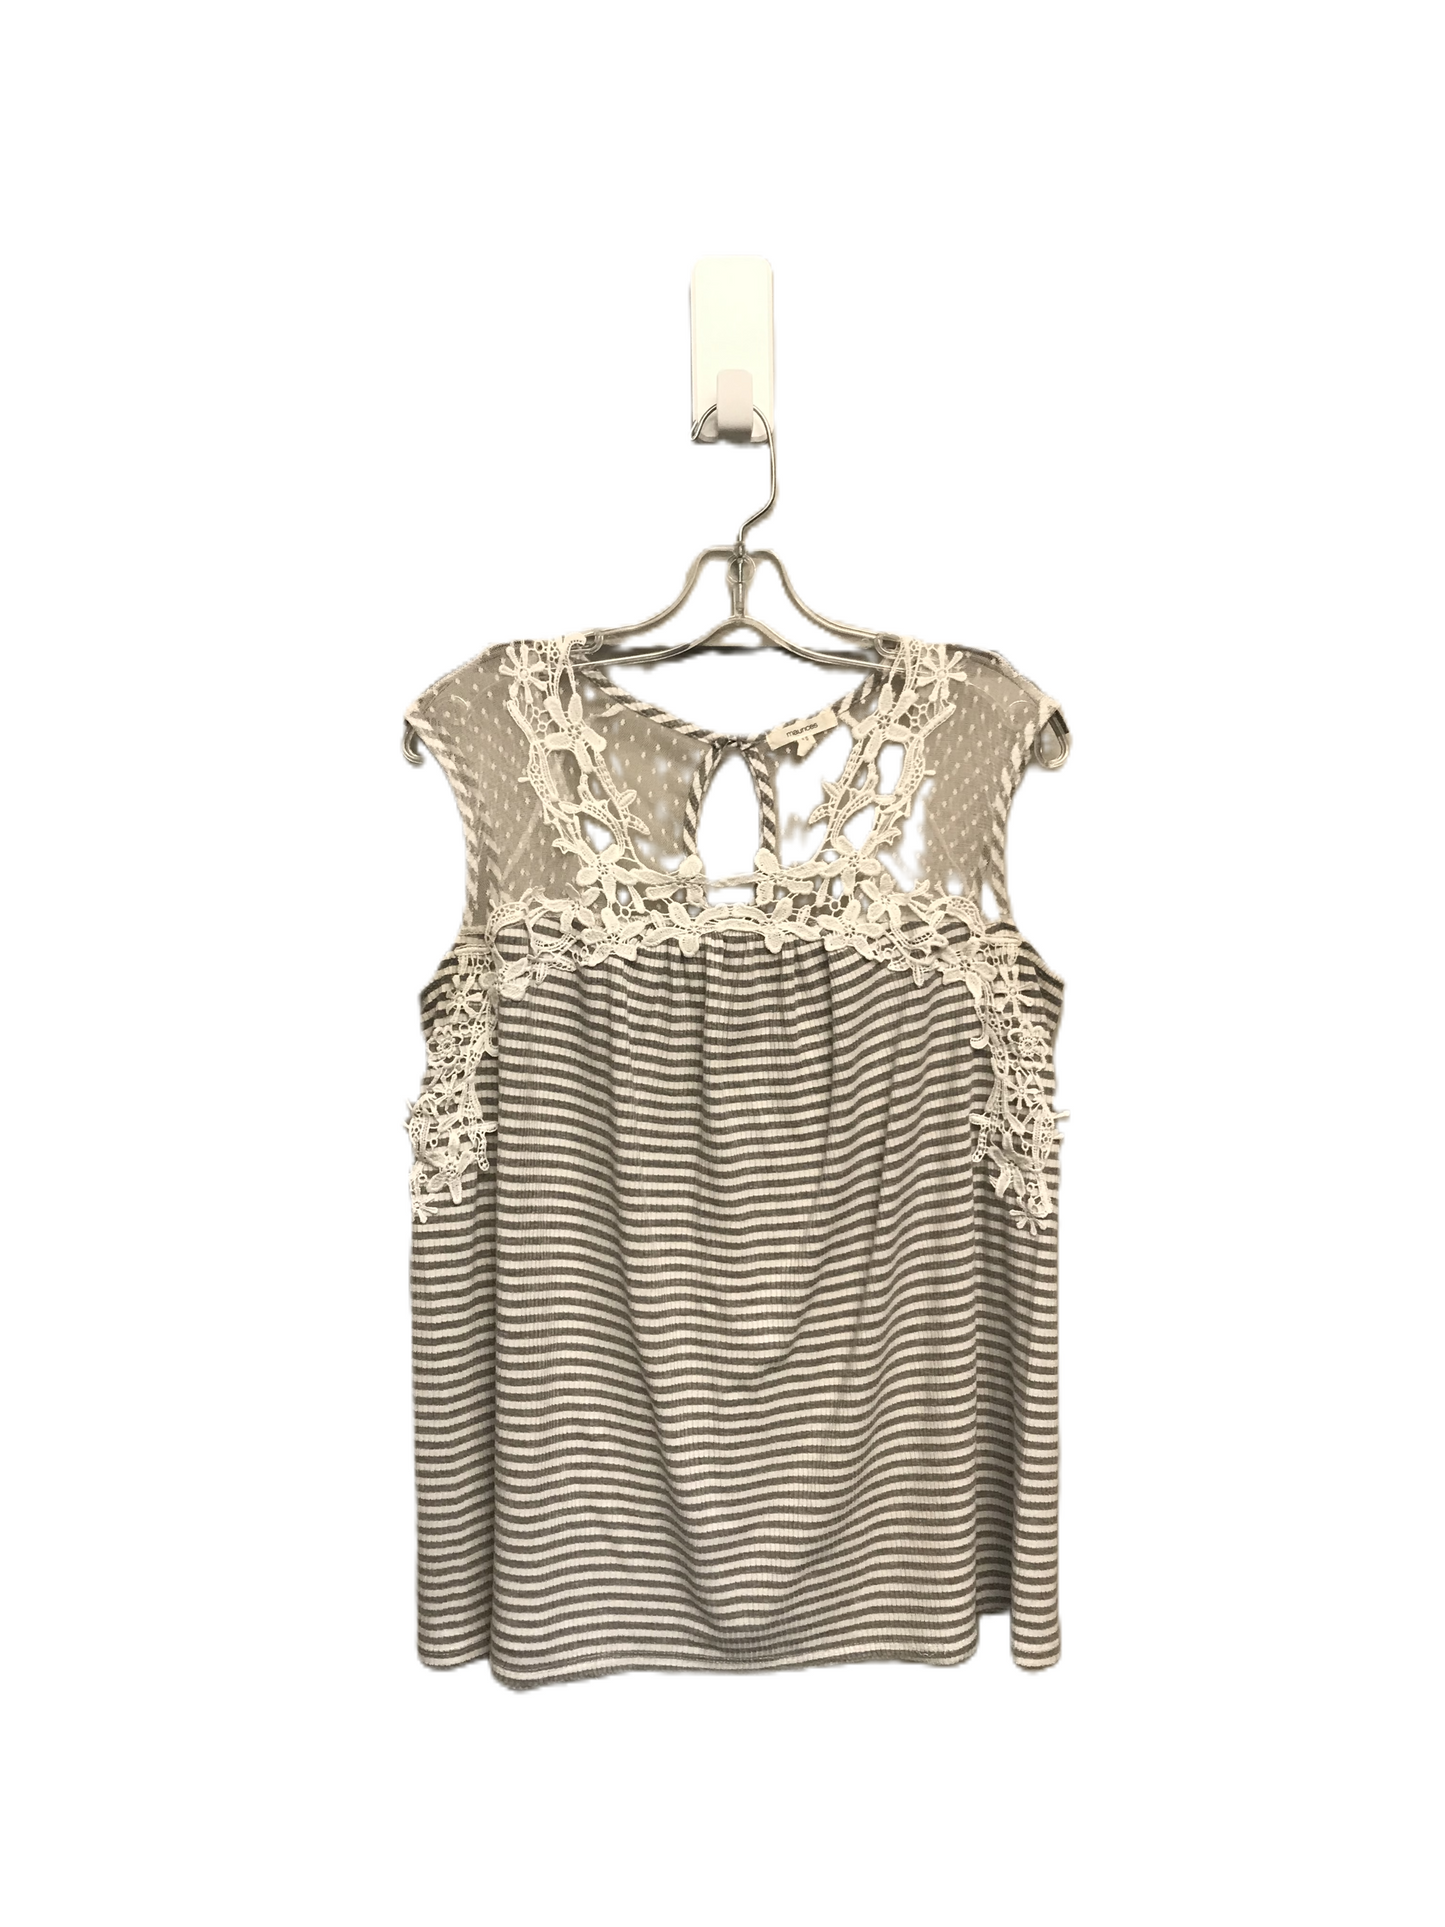 Top Sleeveless By Maurices  Size: M